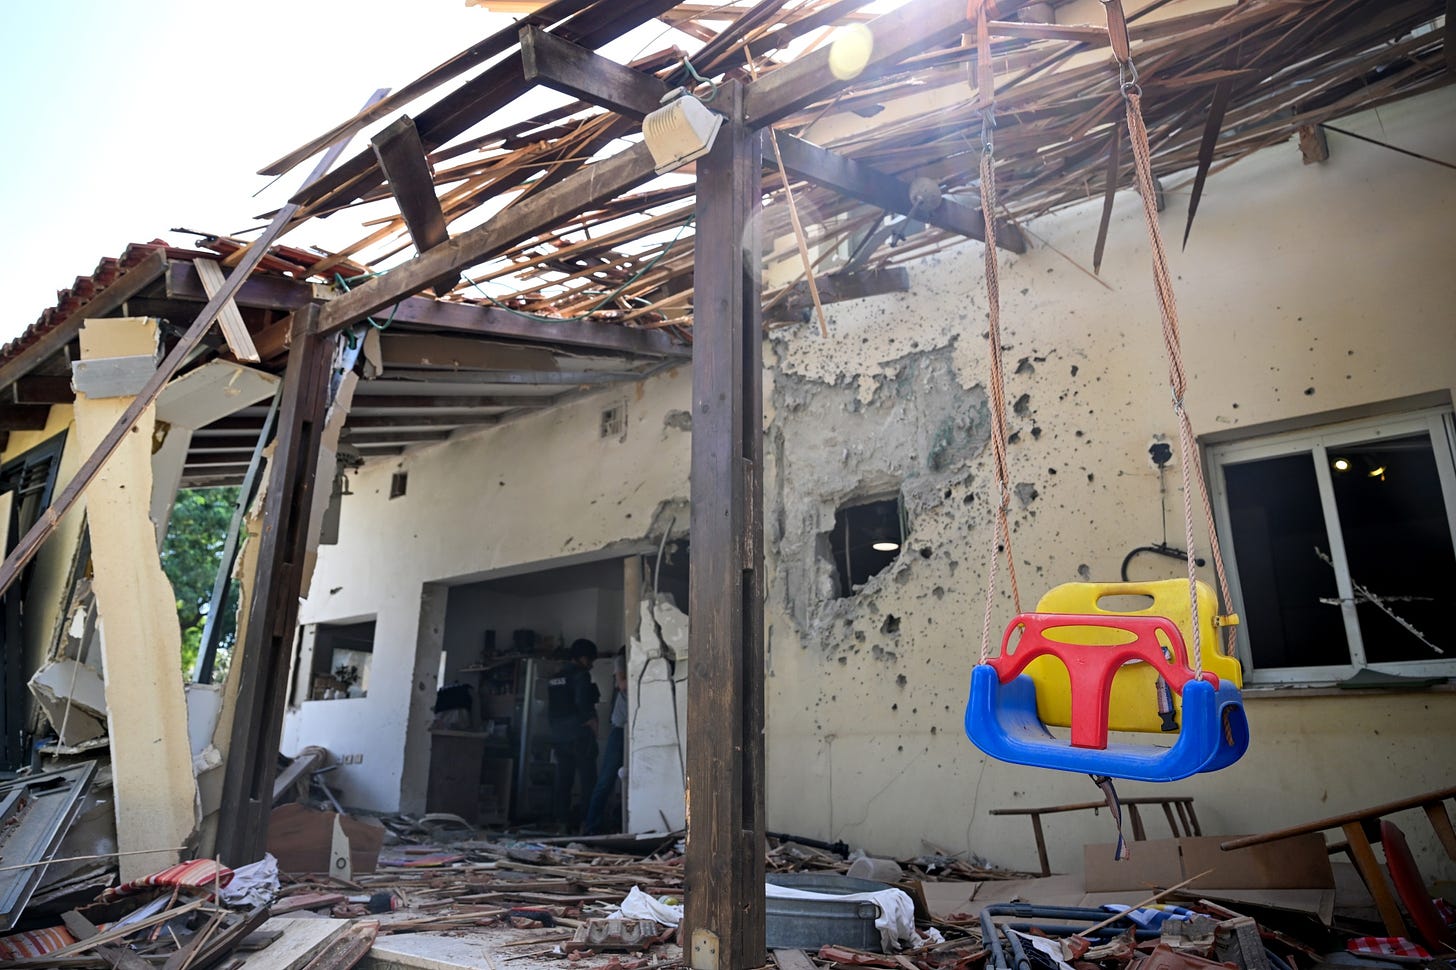 The Gat family house&nbsp;left in ruins after Hamas militants attacked the&nbsp;Kibbutz Be’eri,&nbsp;near the Gaza border, in Israel, on Oct. 13.